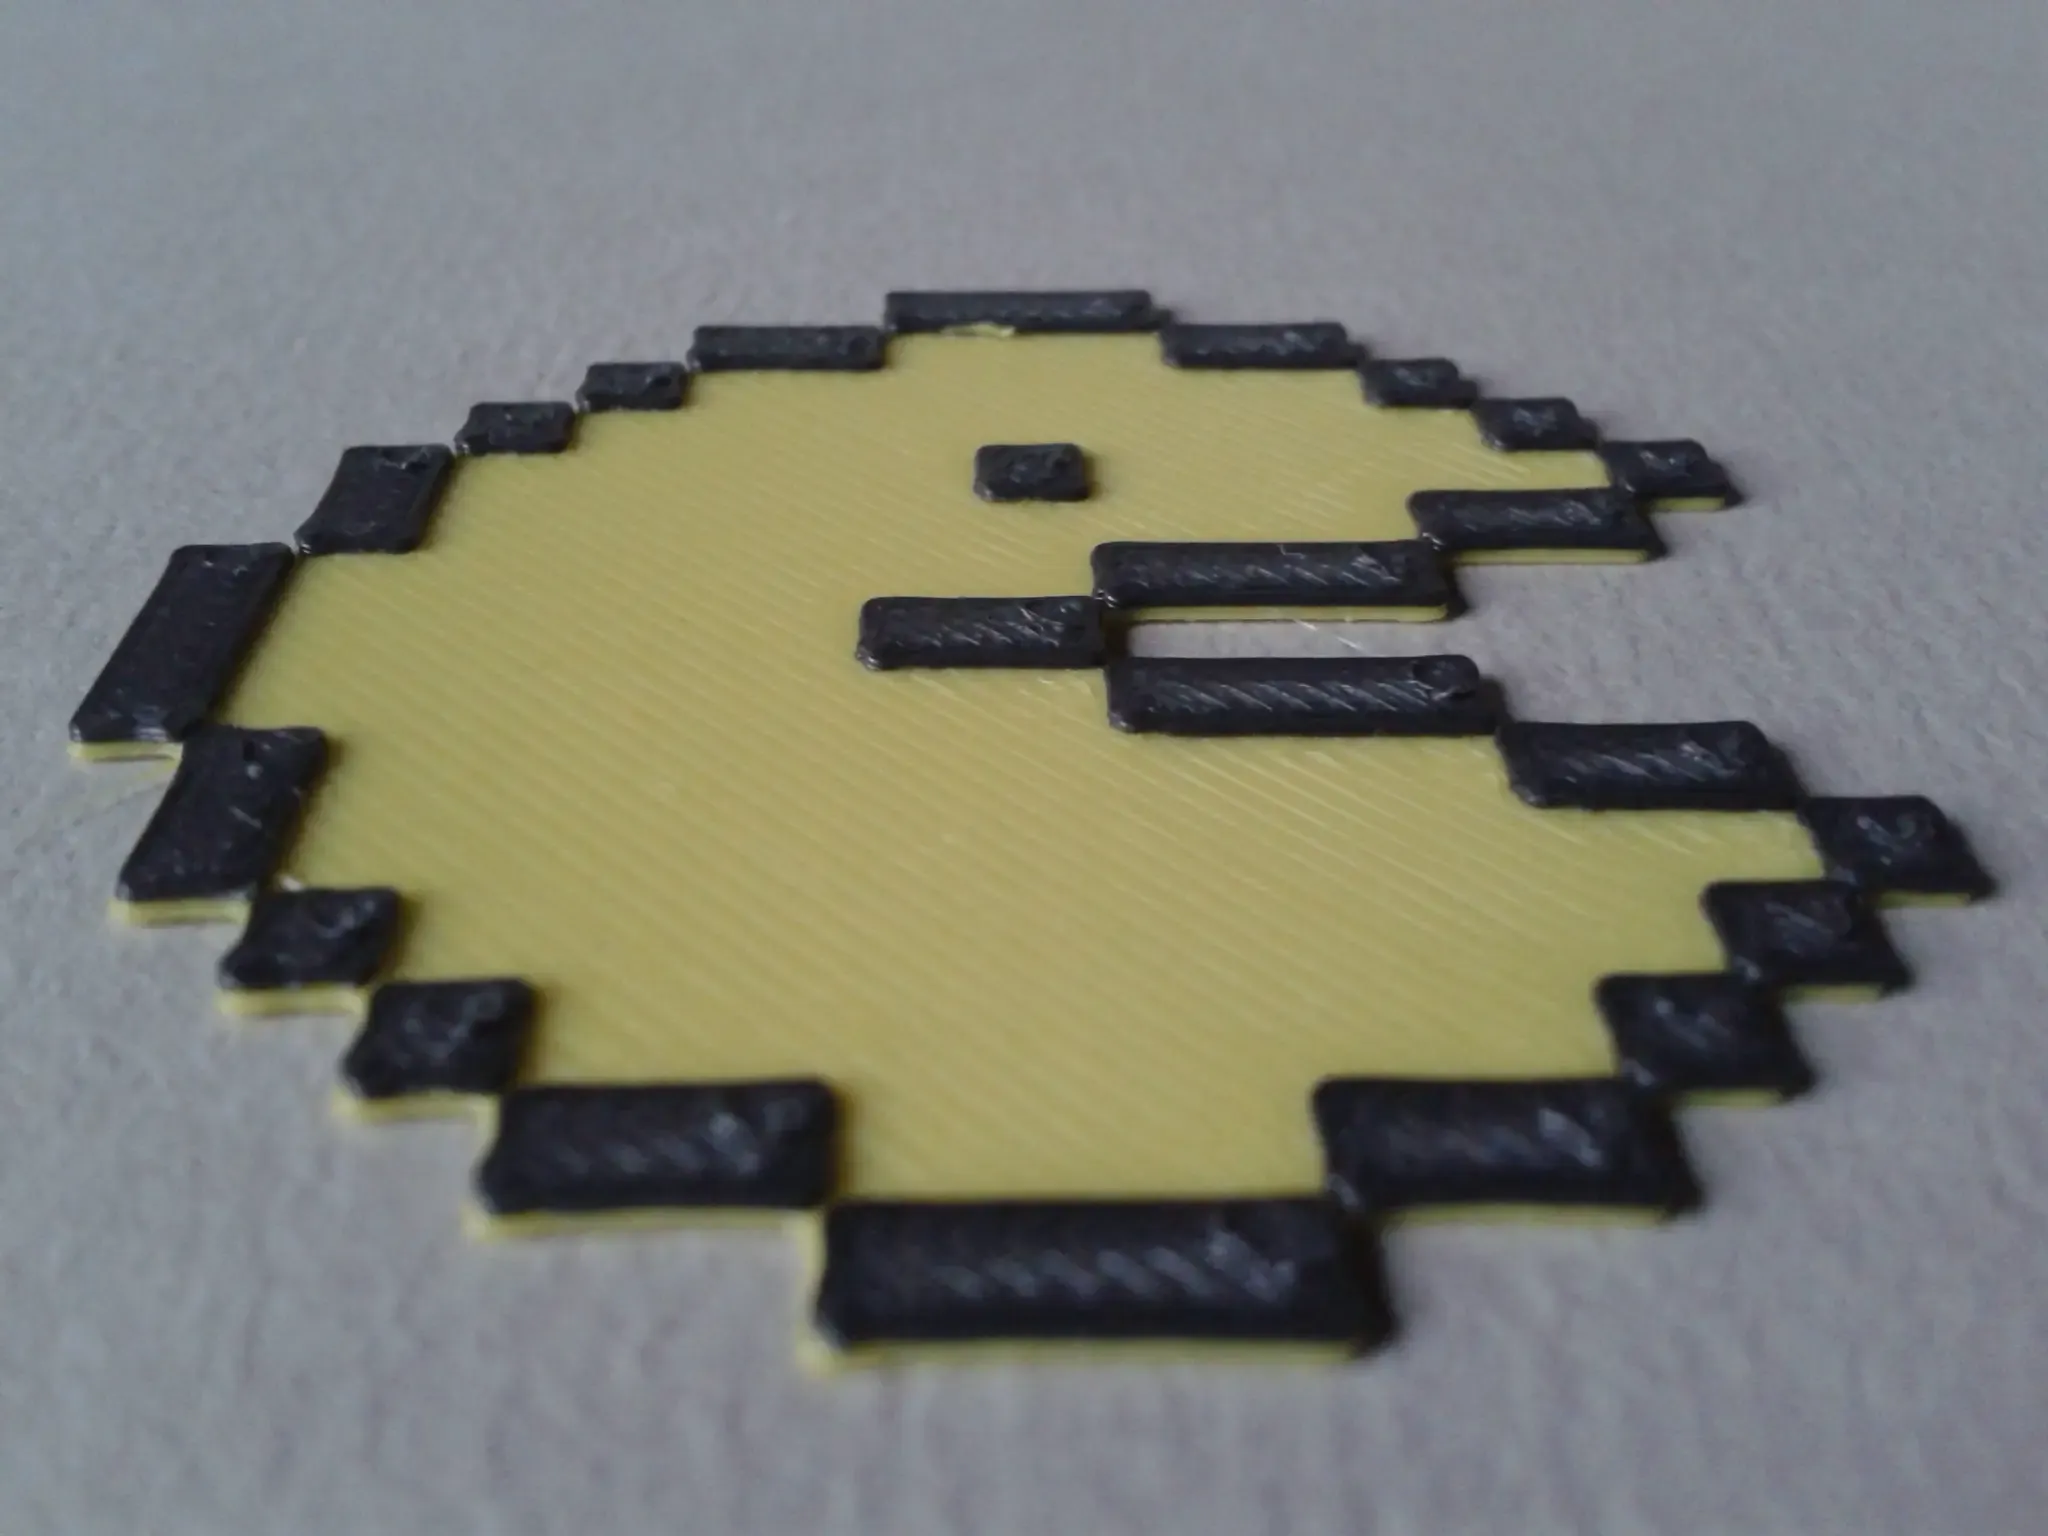 Pacman, with 1 filament changes